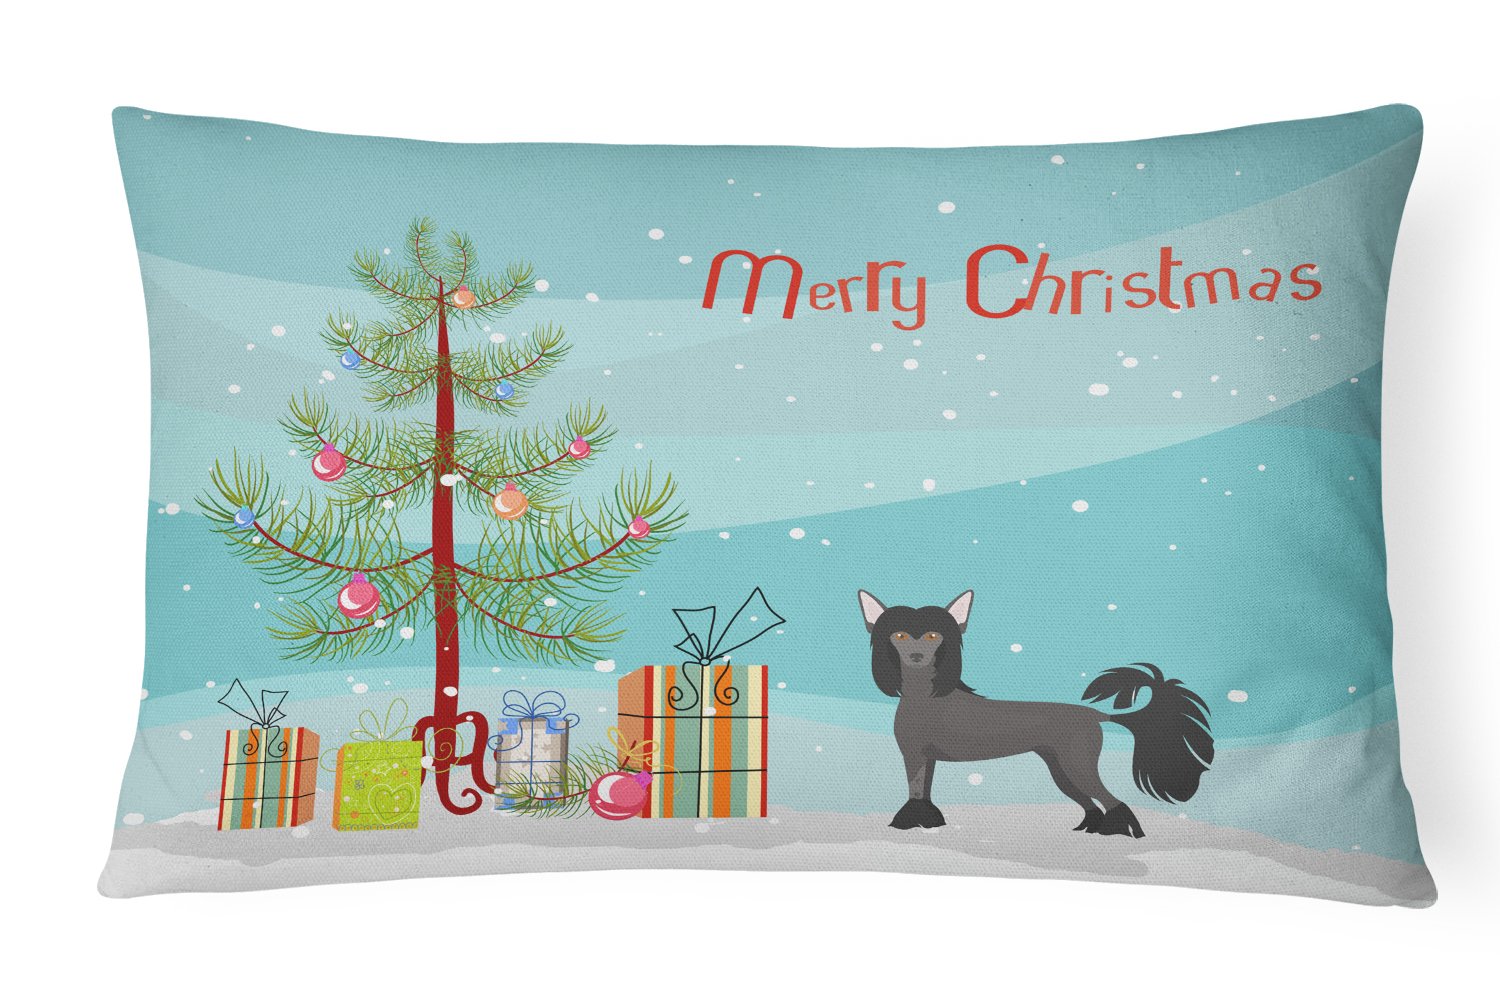 Chinese Crested Christmas Tree Canvas Fabric Decorative Pillow CK3447PW1216 by Caroline's Treasures